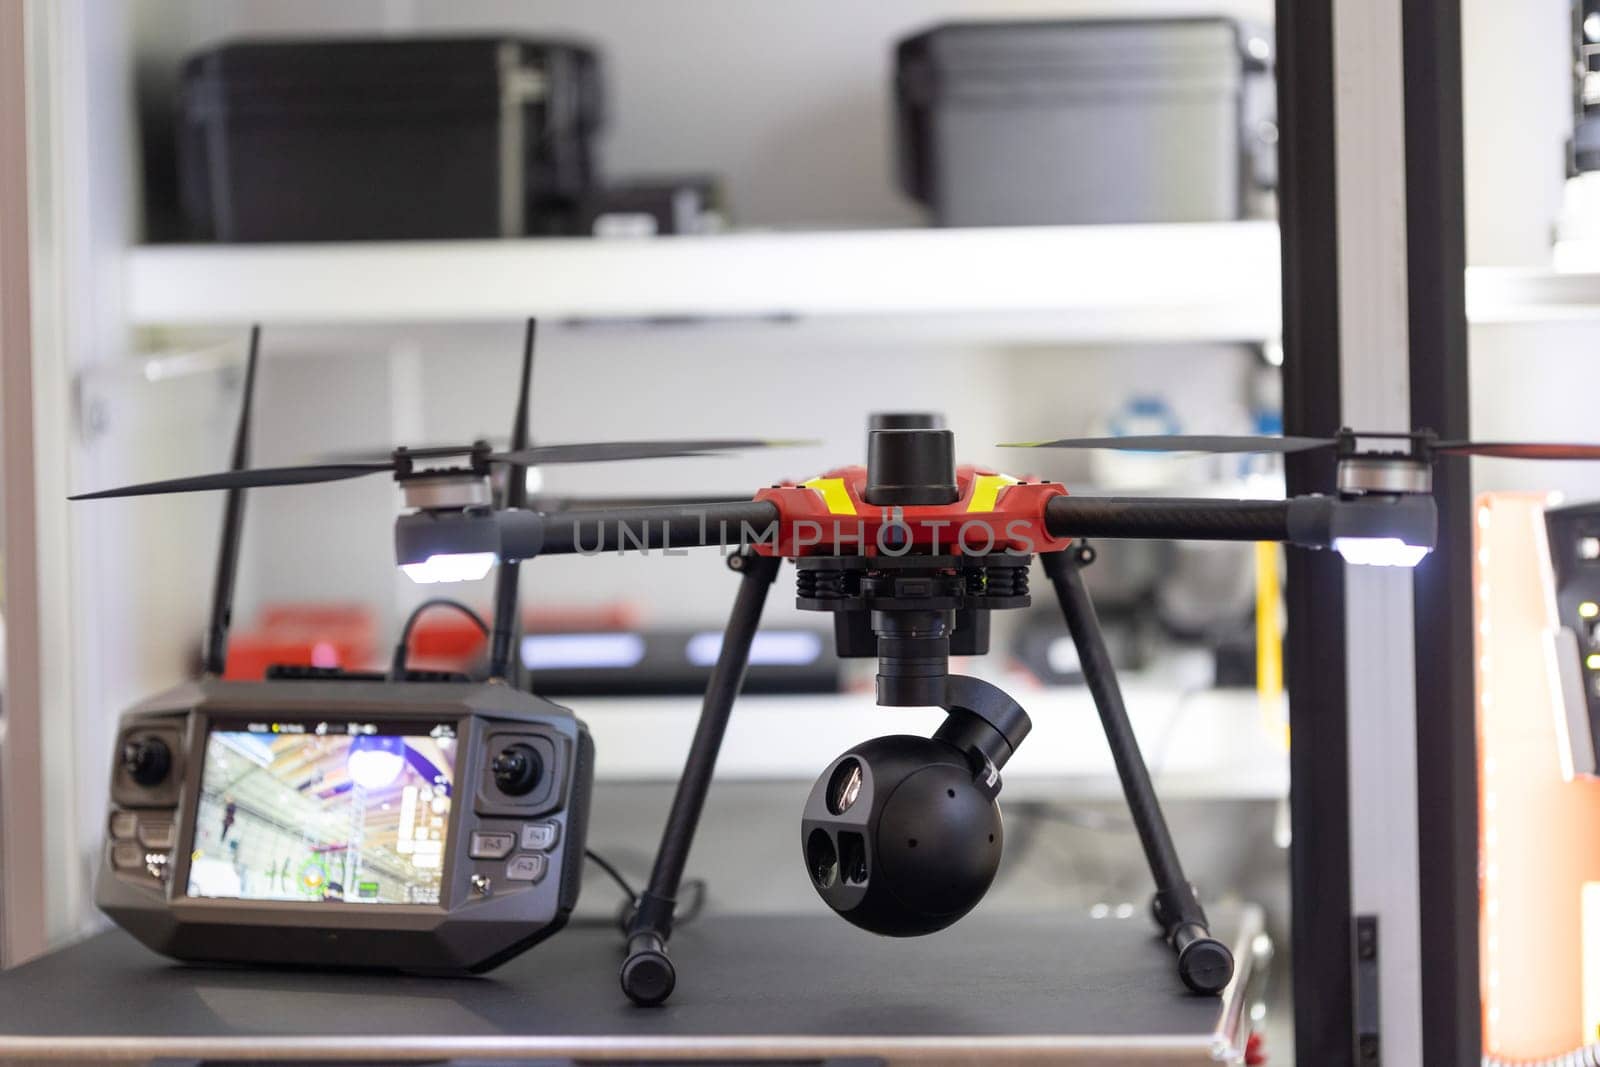 UAV with safety equipment and various safety and work tools.